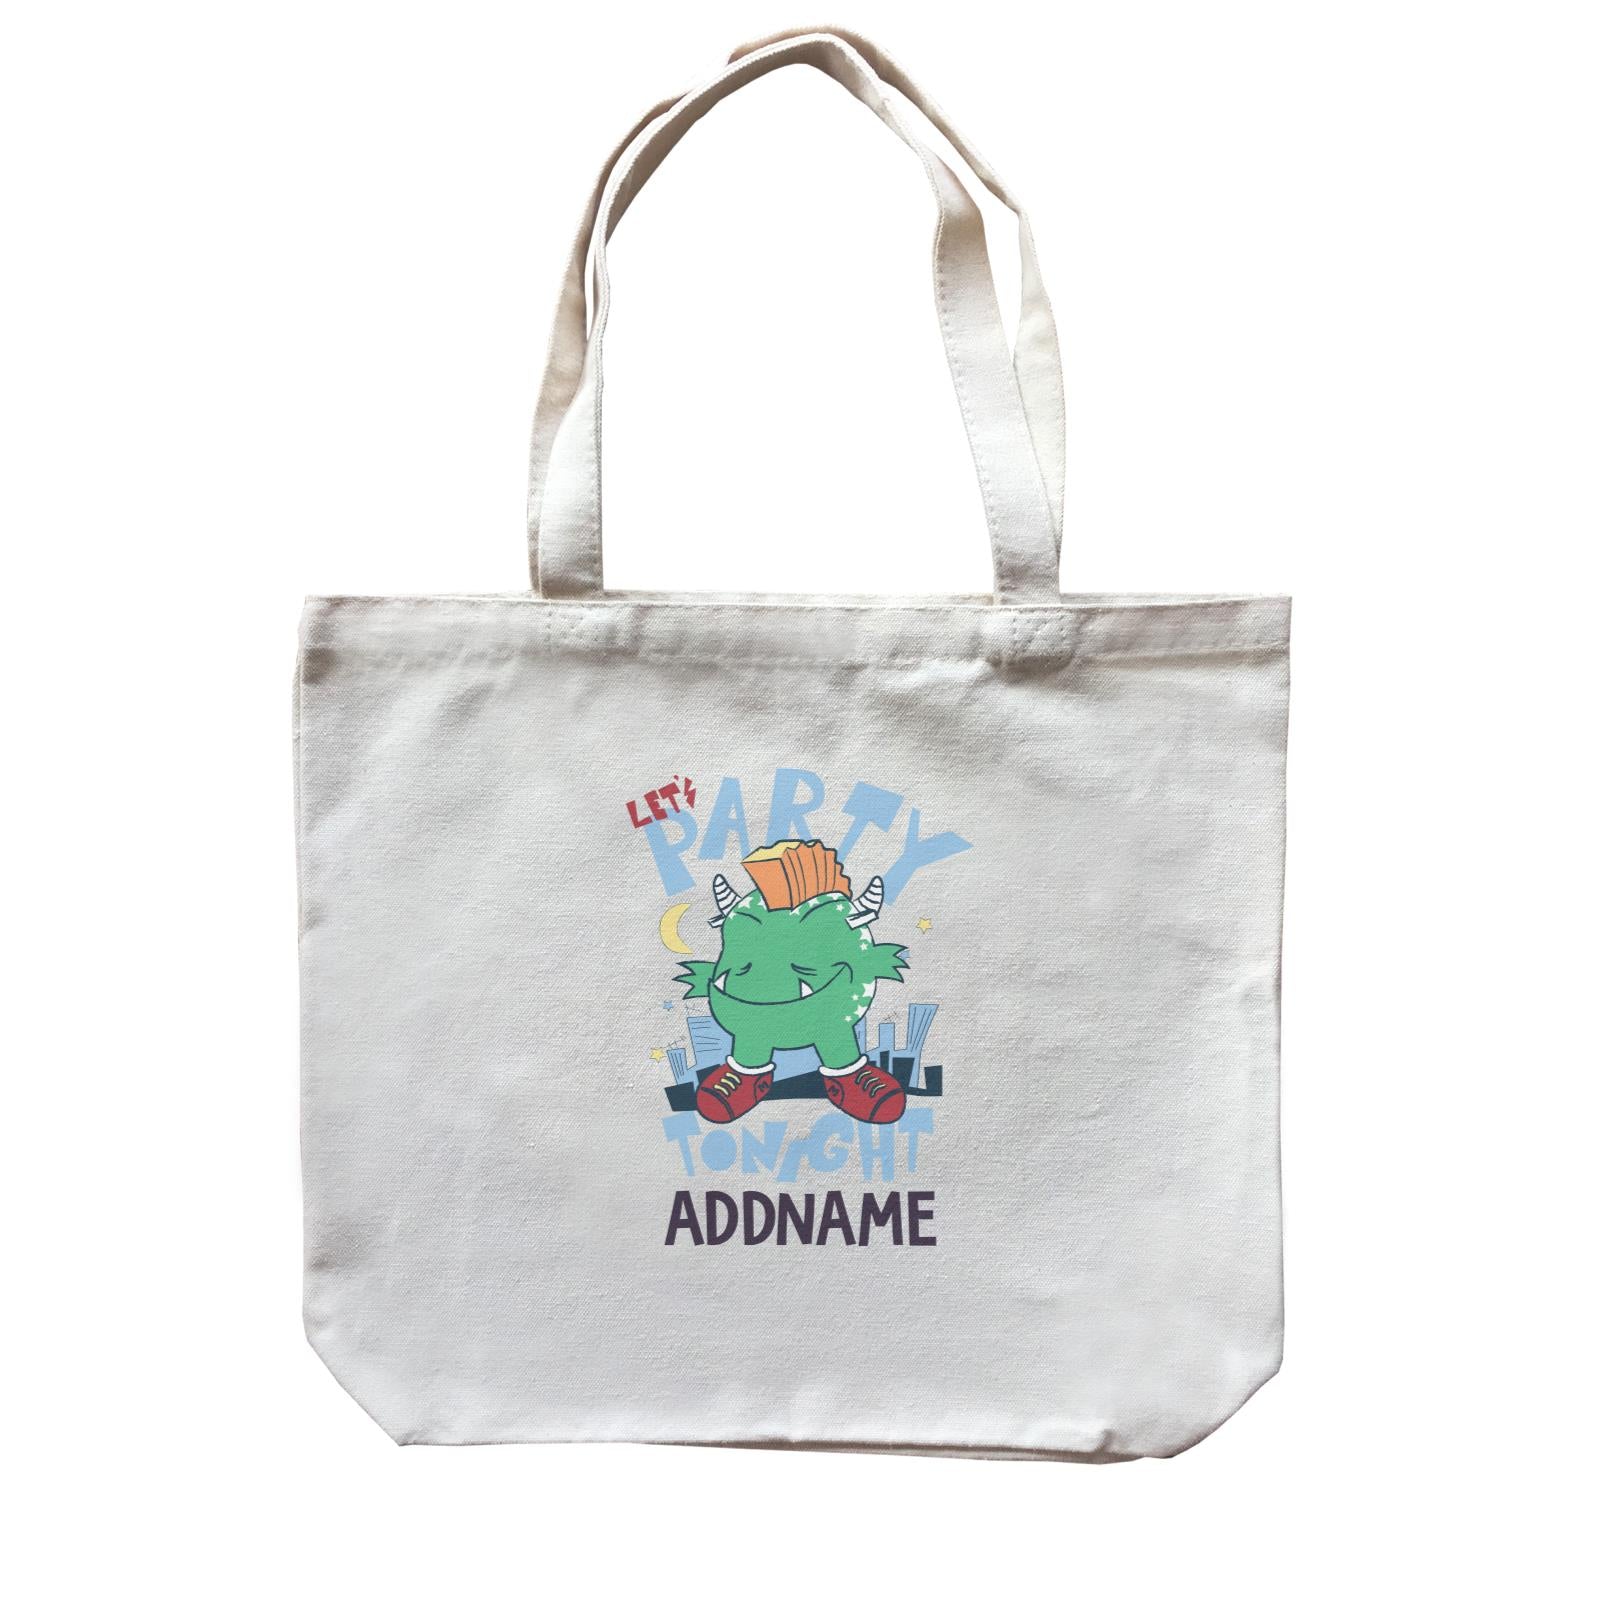 Cool Vibrant Series Let's Party Tonight MonsterAddname Canvas Bag